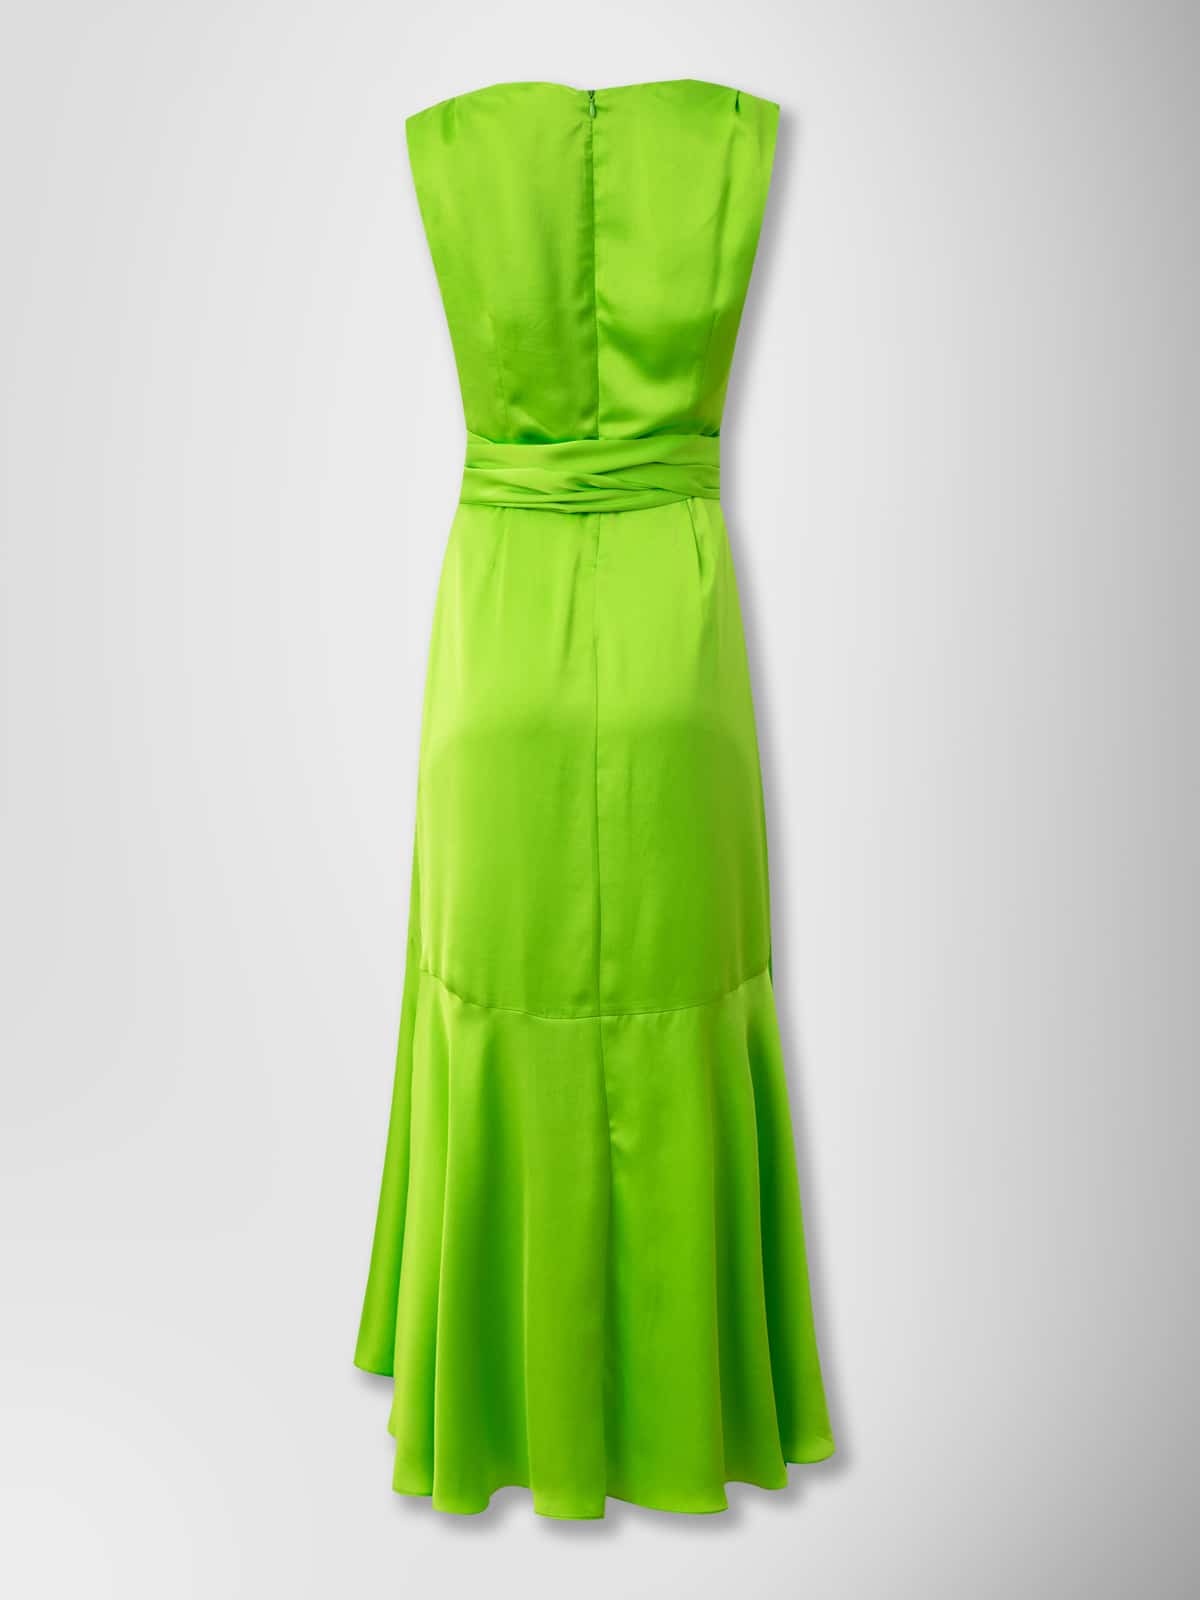 BOW FRONT DRESS L.GREEN